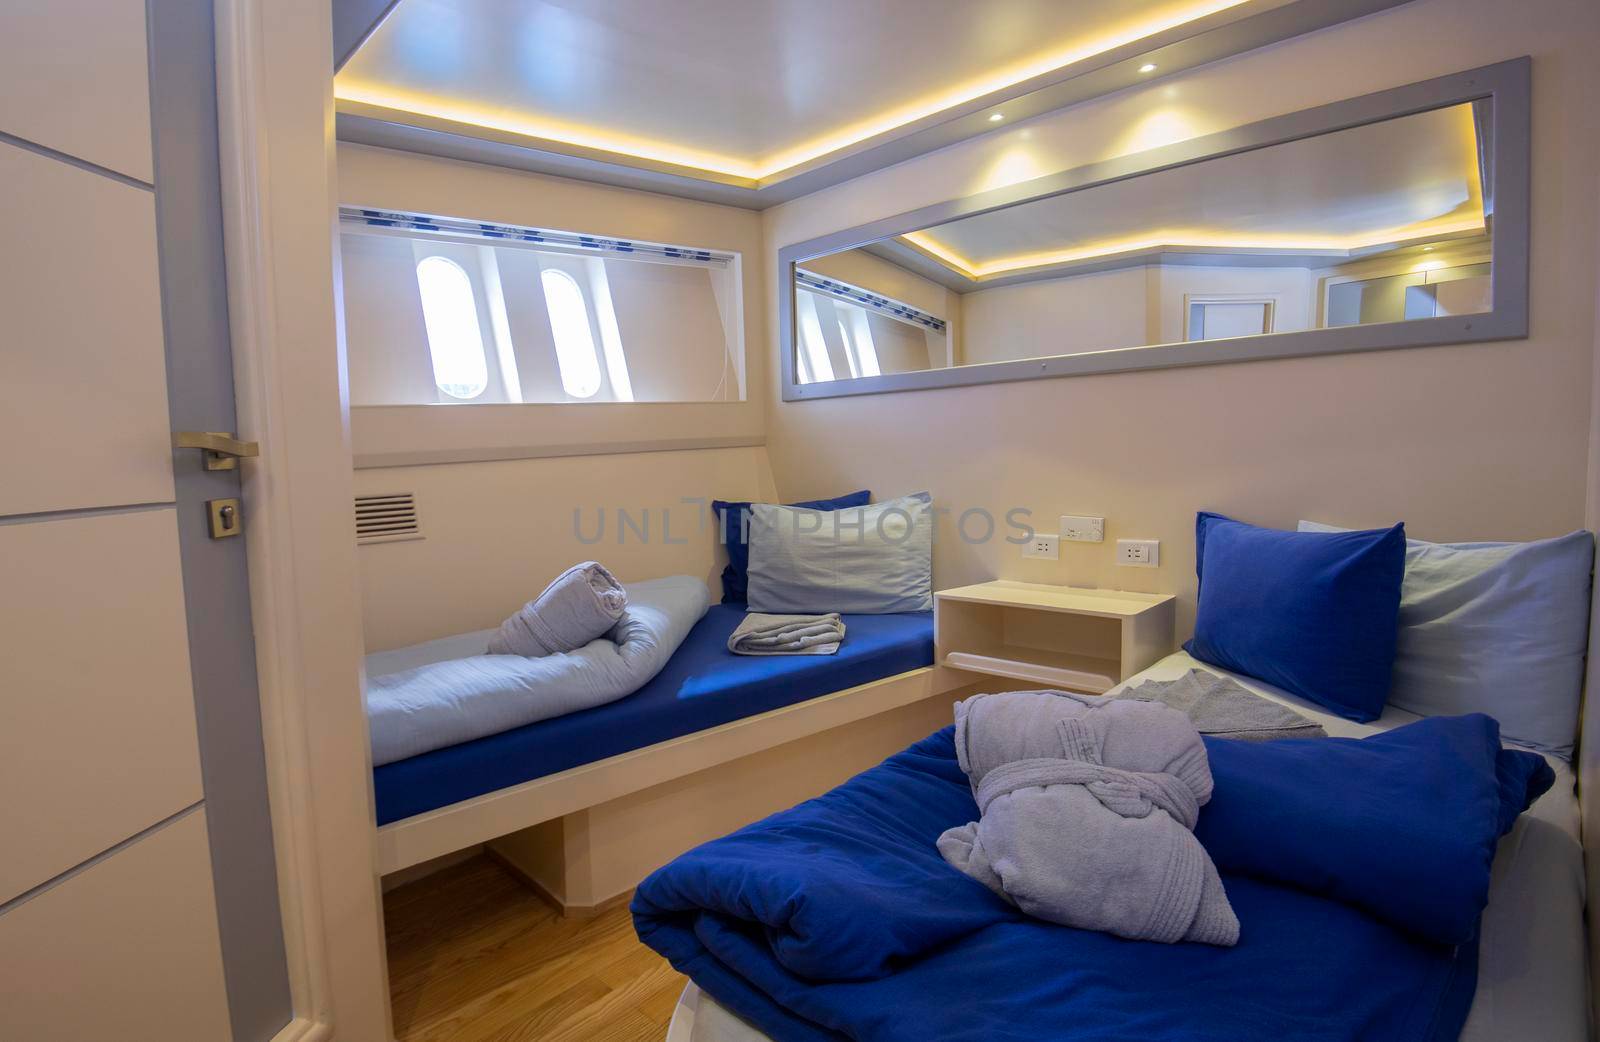 Interior decor of cabin bedroom on luxury sailing yacht with twin beds